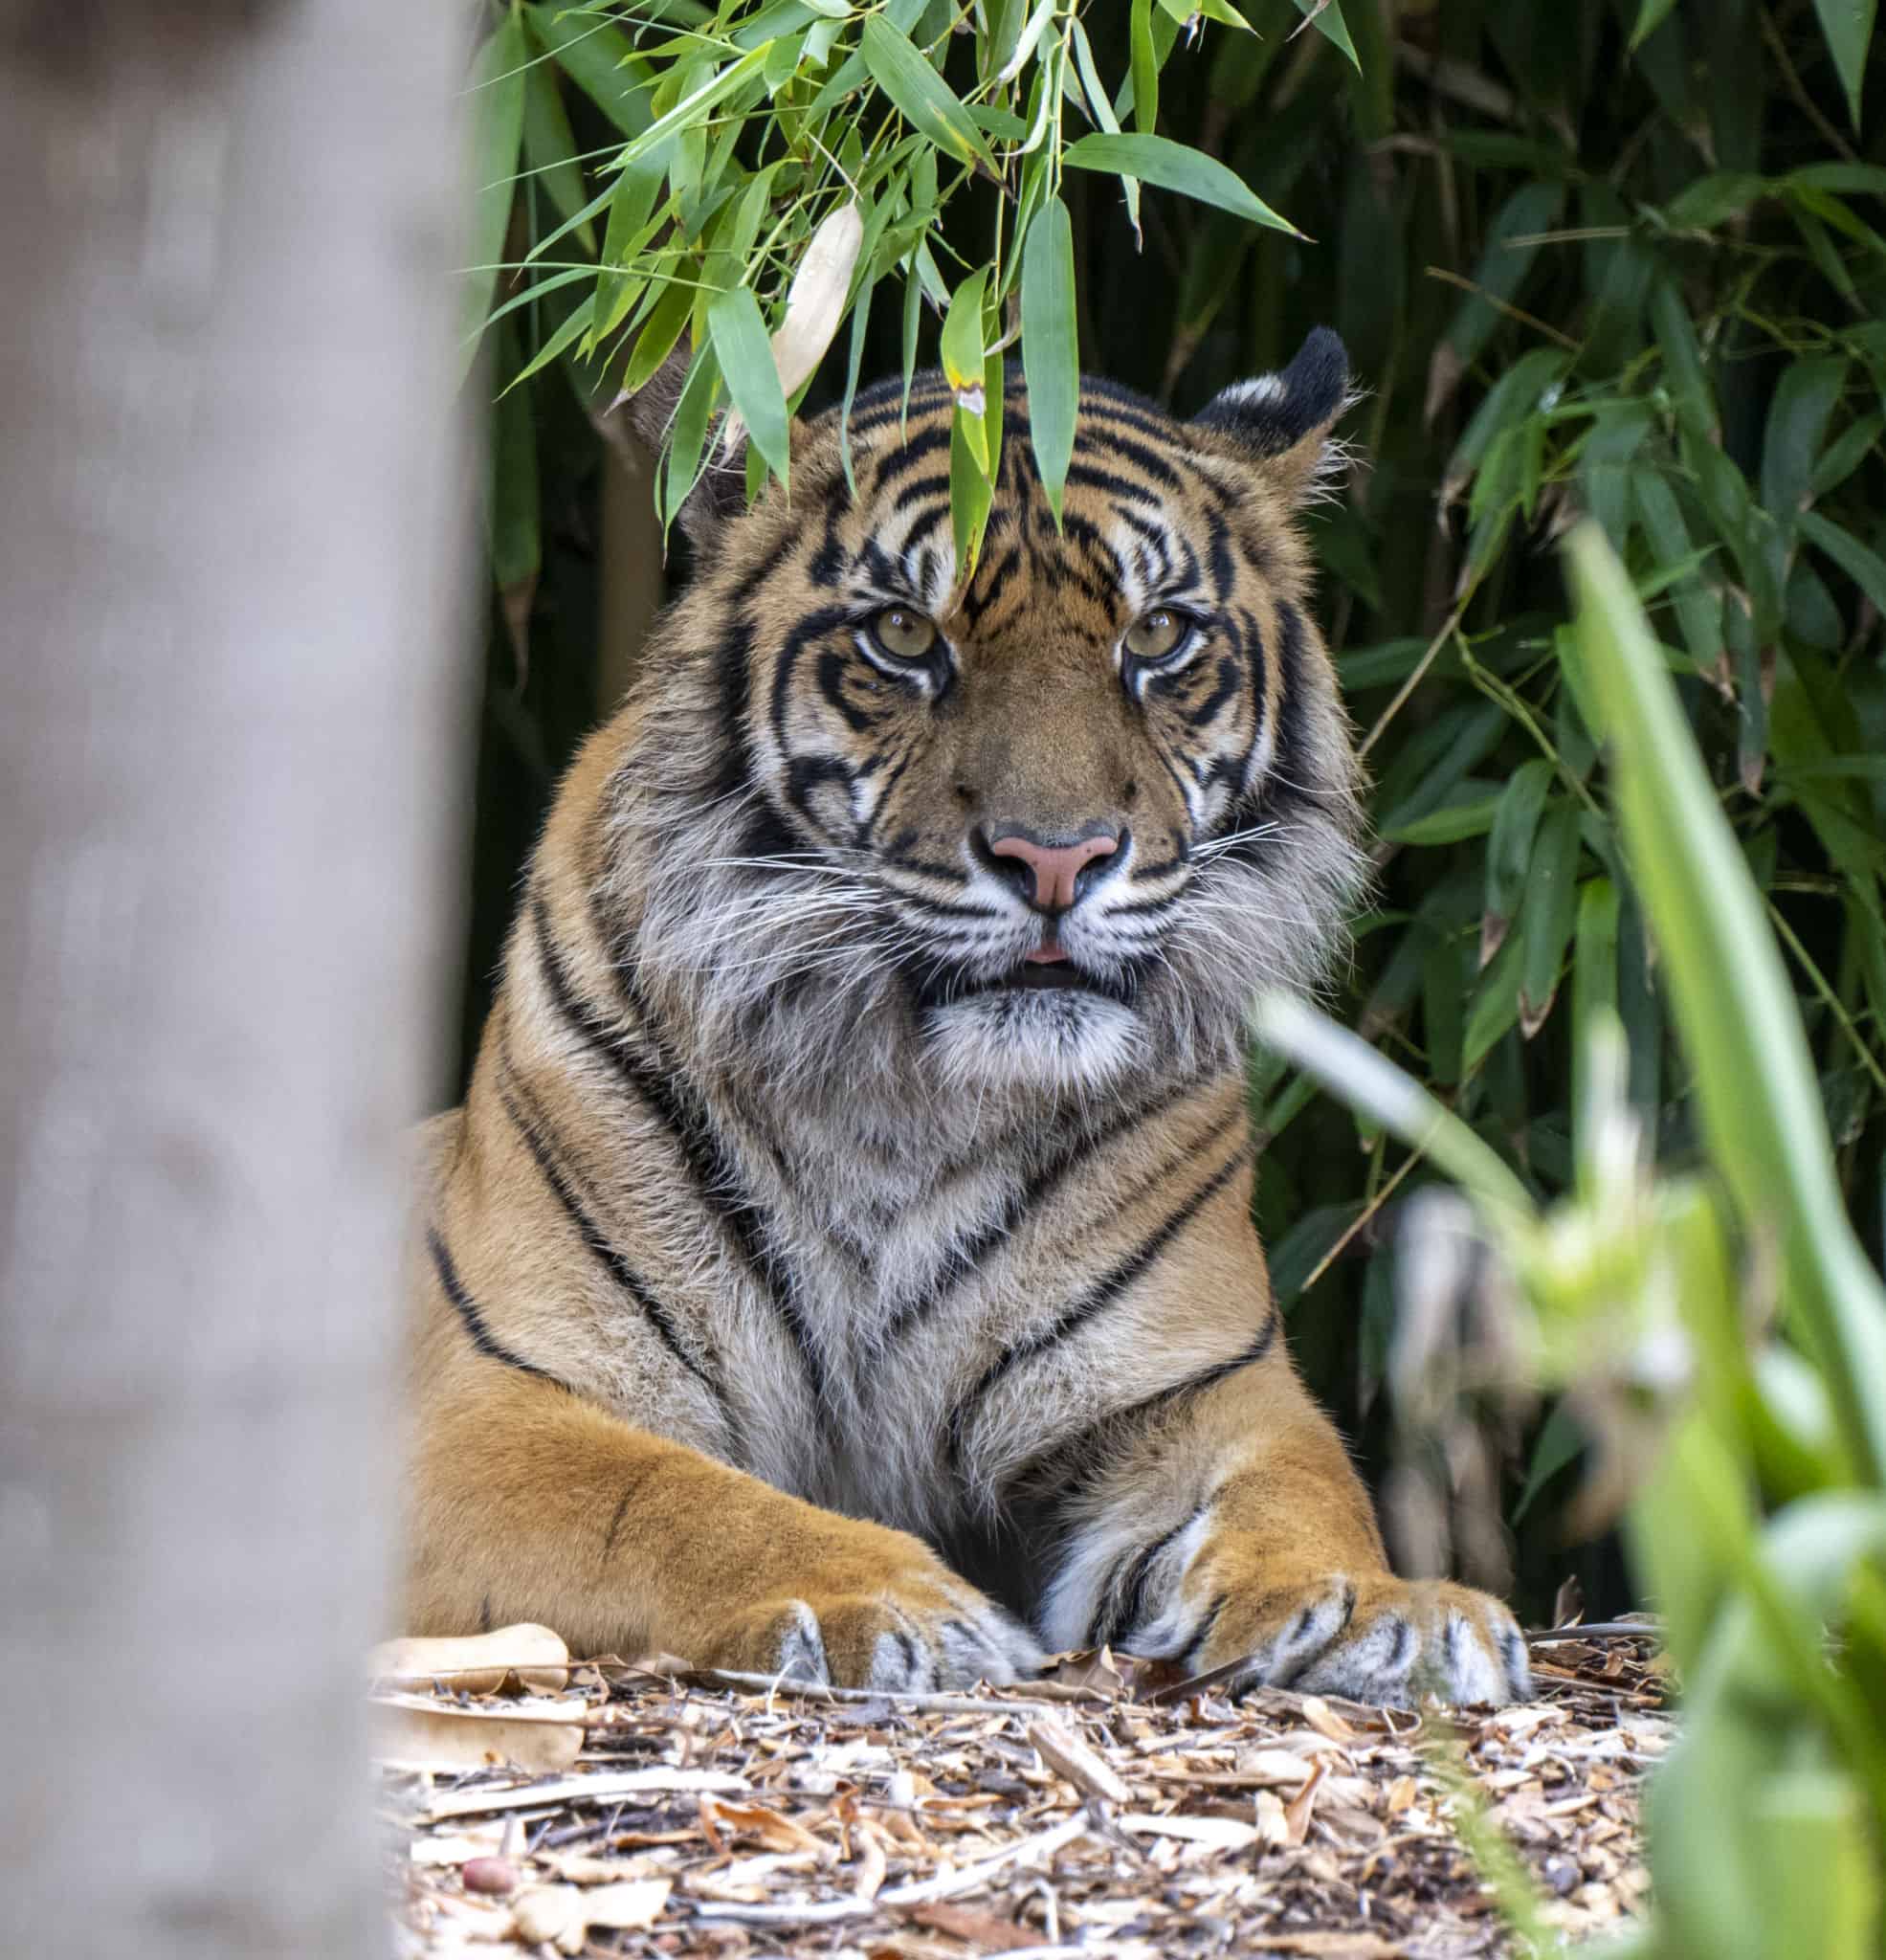 Tiger star shows off her stripes (and spots) at Adelaide Zoo - Adelaide Zoo